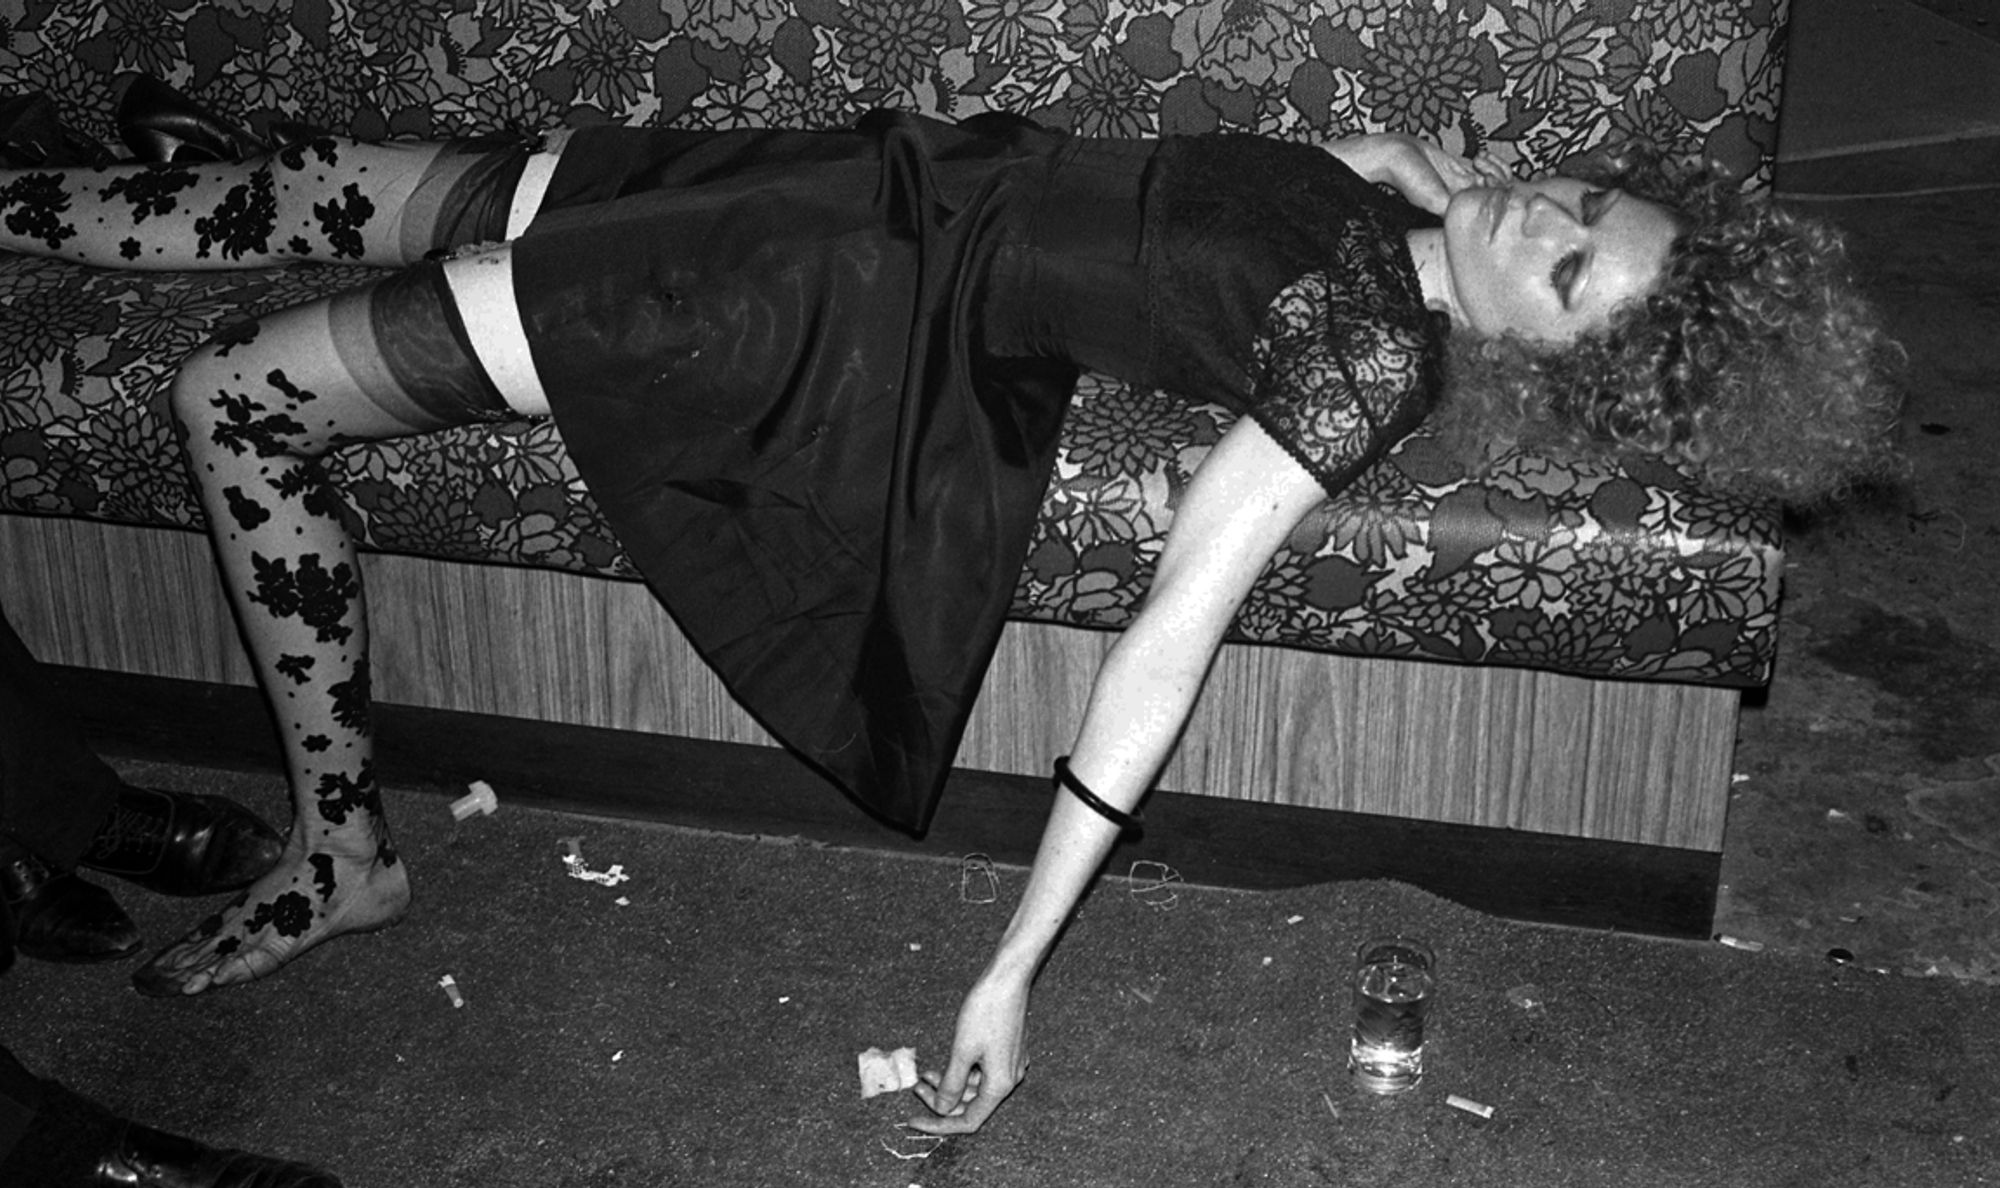 A woman wearing a black satin dress and black lace stockings lies unconscious on a couch.